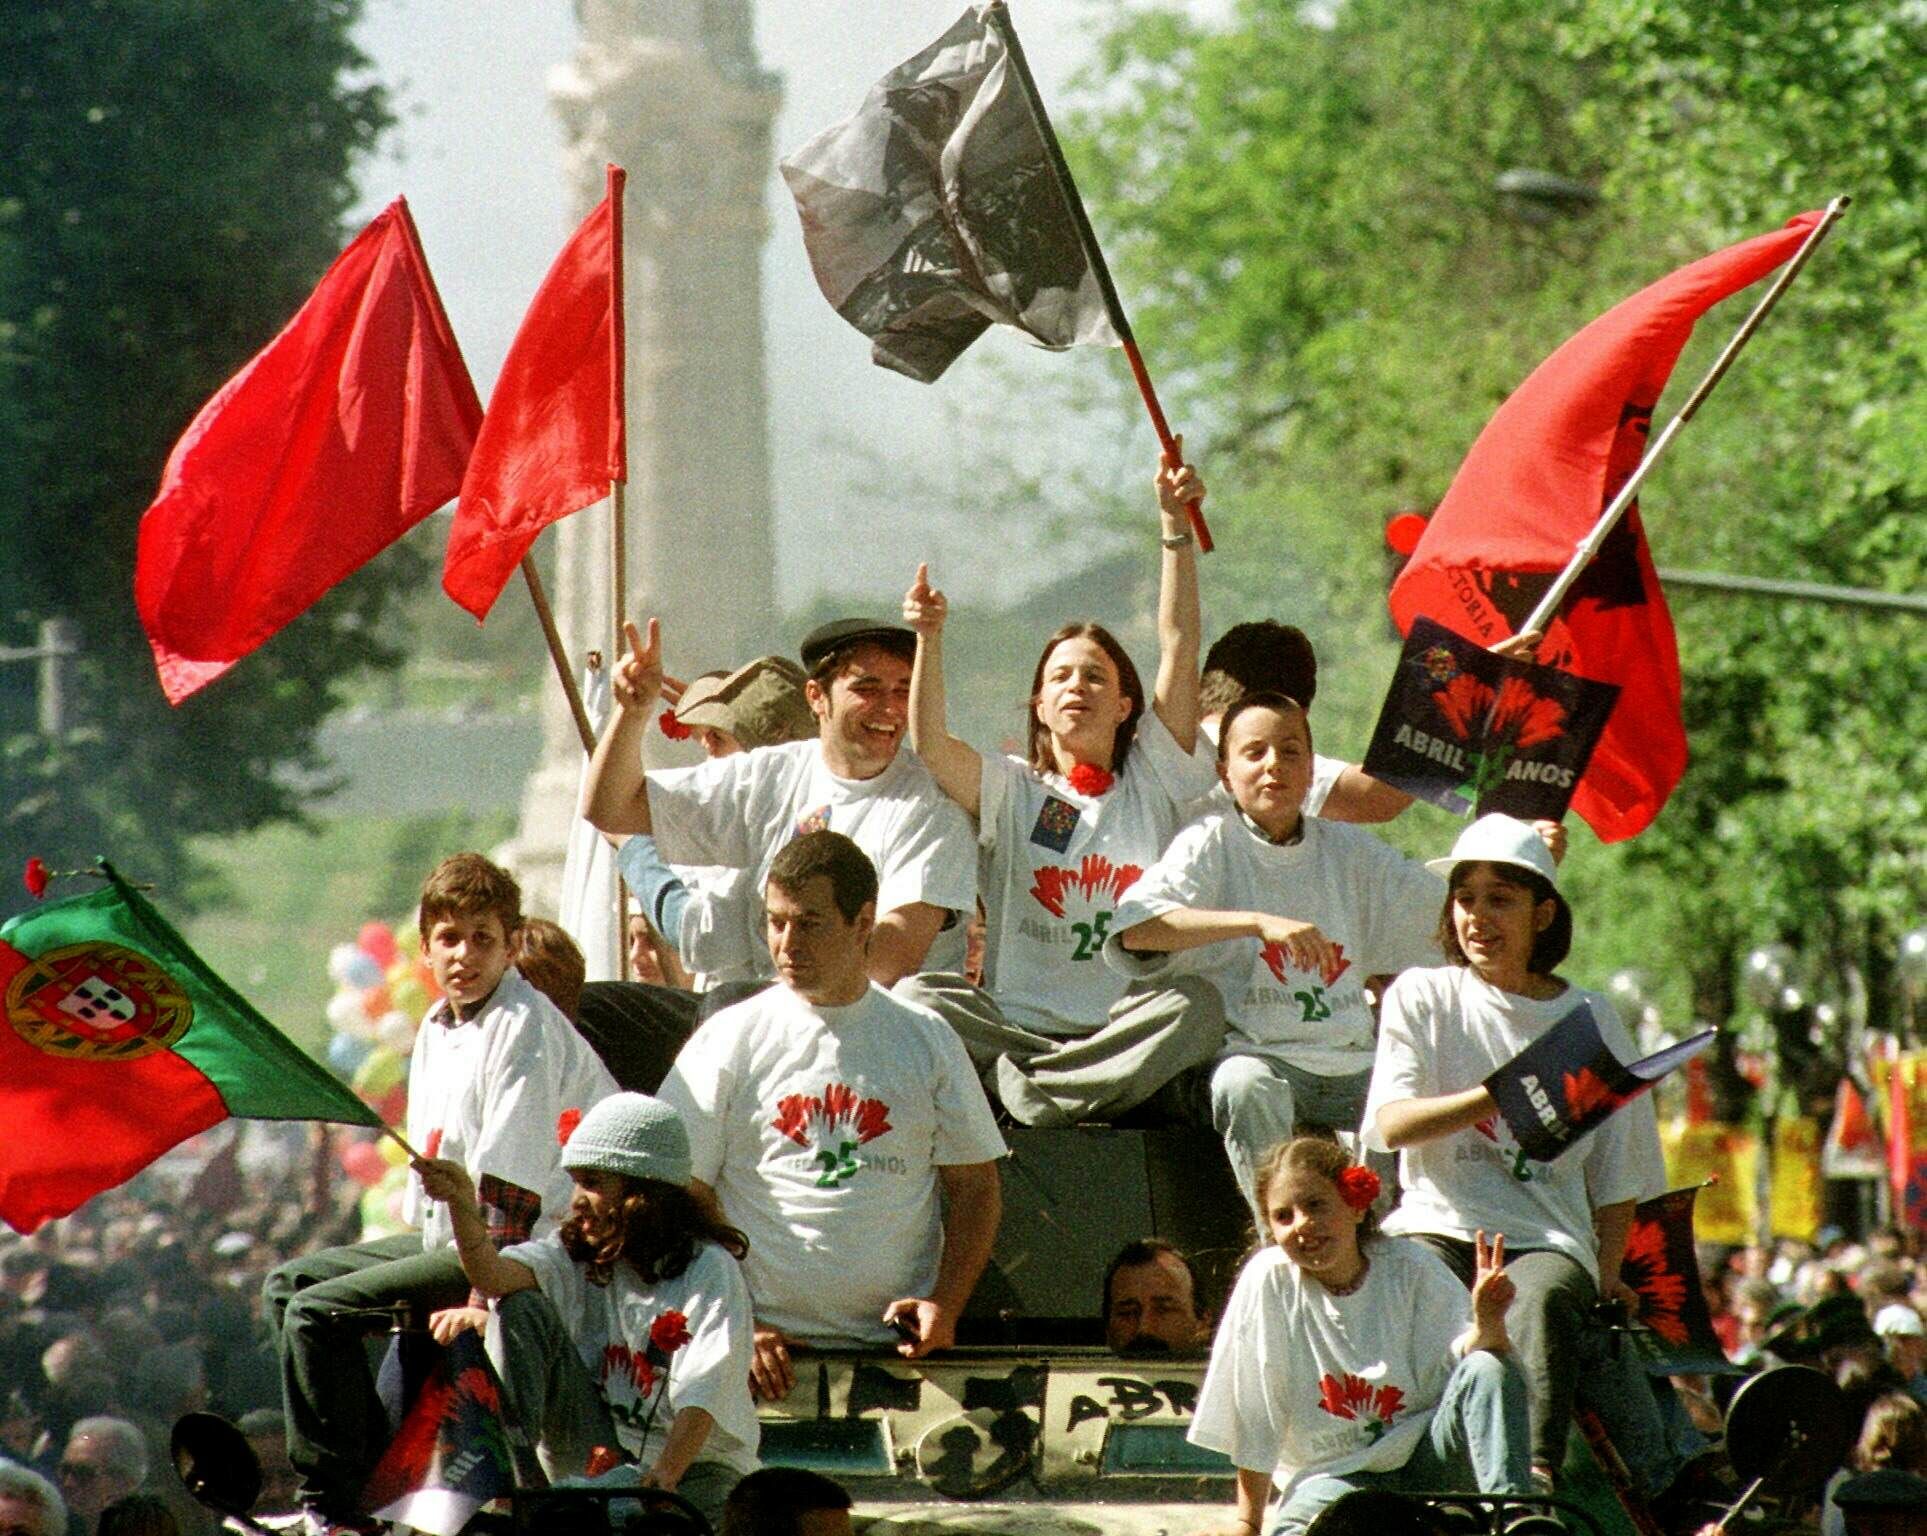 Celebración del 25 aniversario de la Revolución de los Claveles en Lisboa.Youngsters sporting red carnations wave flags, while riding atop a 1970's Portuguese army armored car, during a march down Lisbon's Avenida da Liberdade main avenue, Sunday April 25 1999, commemorating the 25th anniversary of the 1974 Revolution of the Carnations. Thousands gathered in downtown Lisbon to celebrate the army-led bloodless coup toppled a 41-year dictatorship. (AP Photo/Gael Cornier) / Tanque.